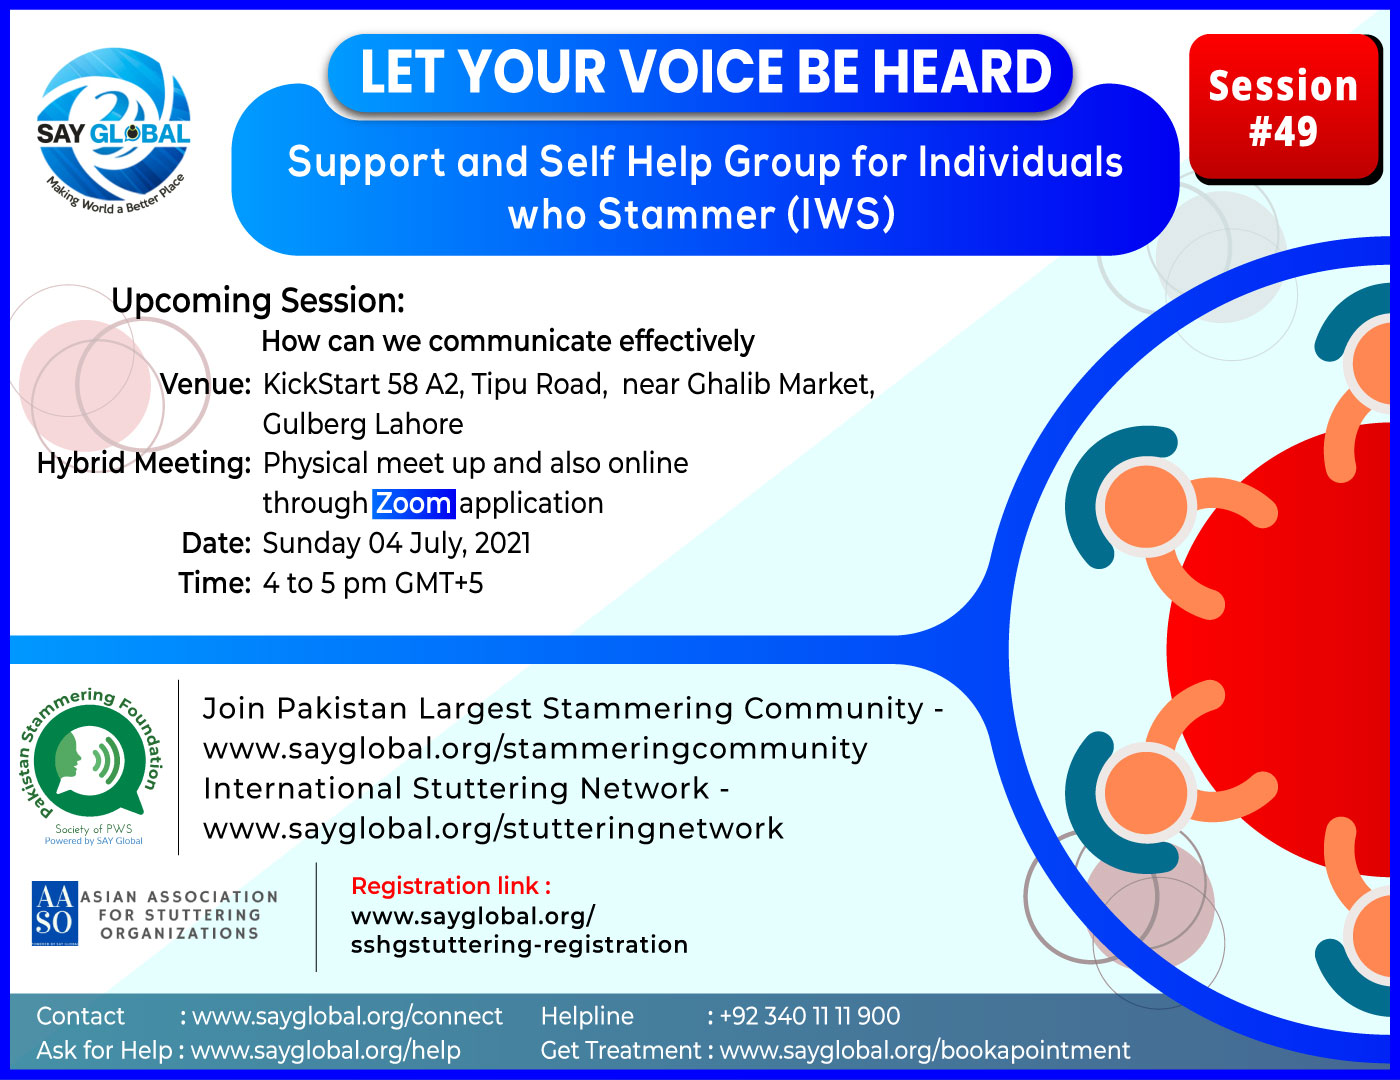 Let your voice be heard – Support and Self Help Group Session# 49